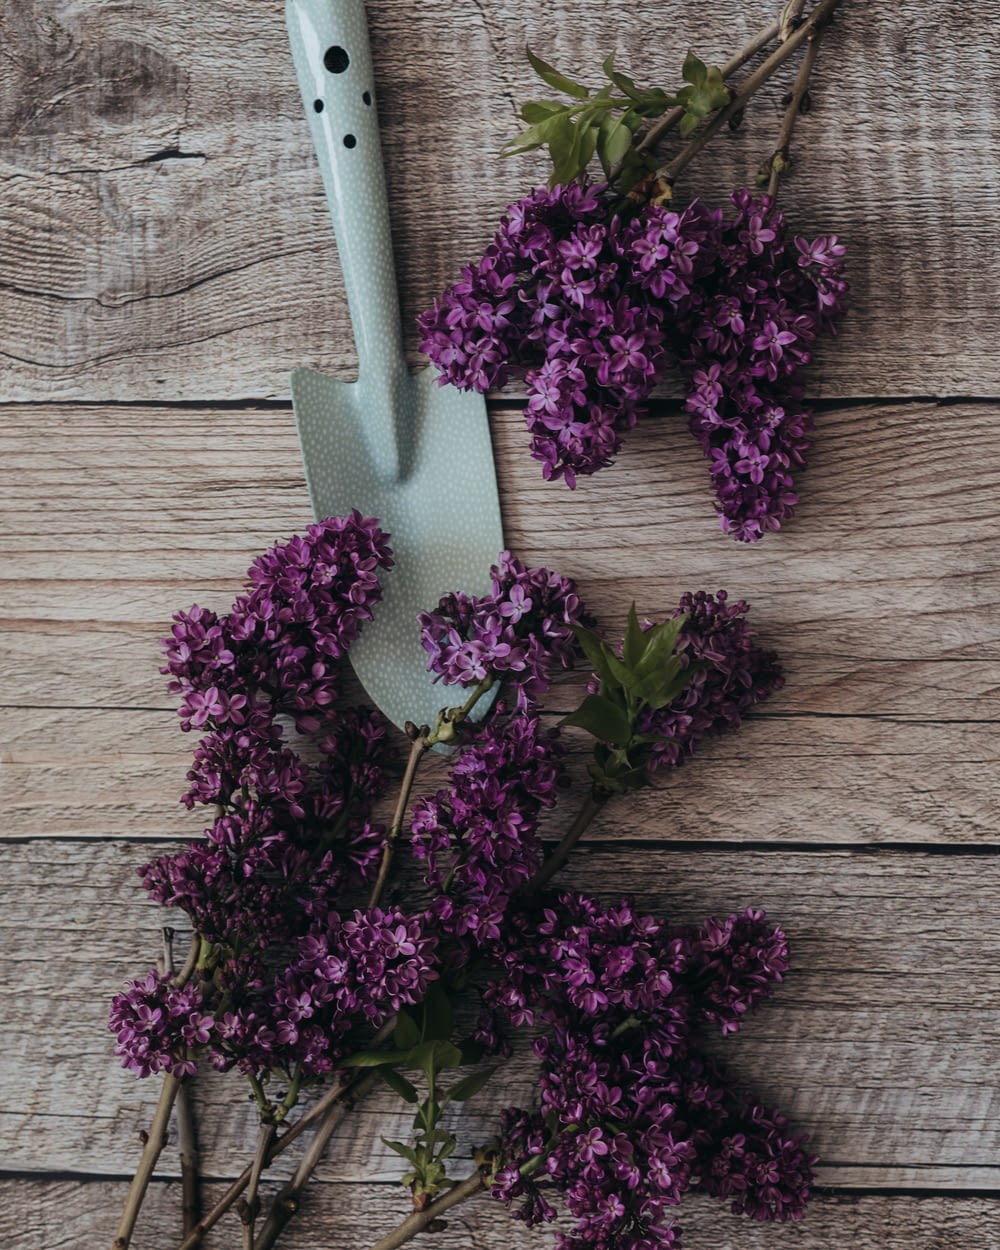 a knife and some purple flowers on a table